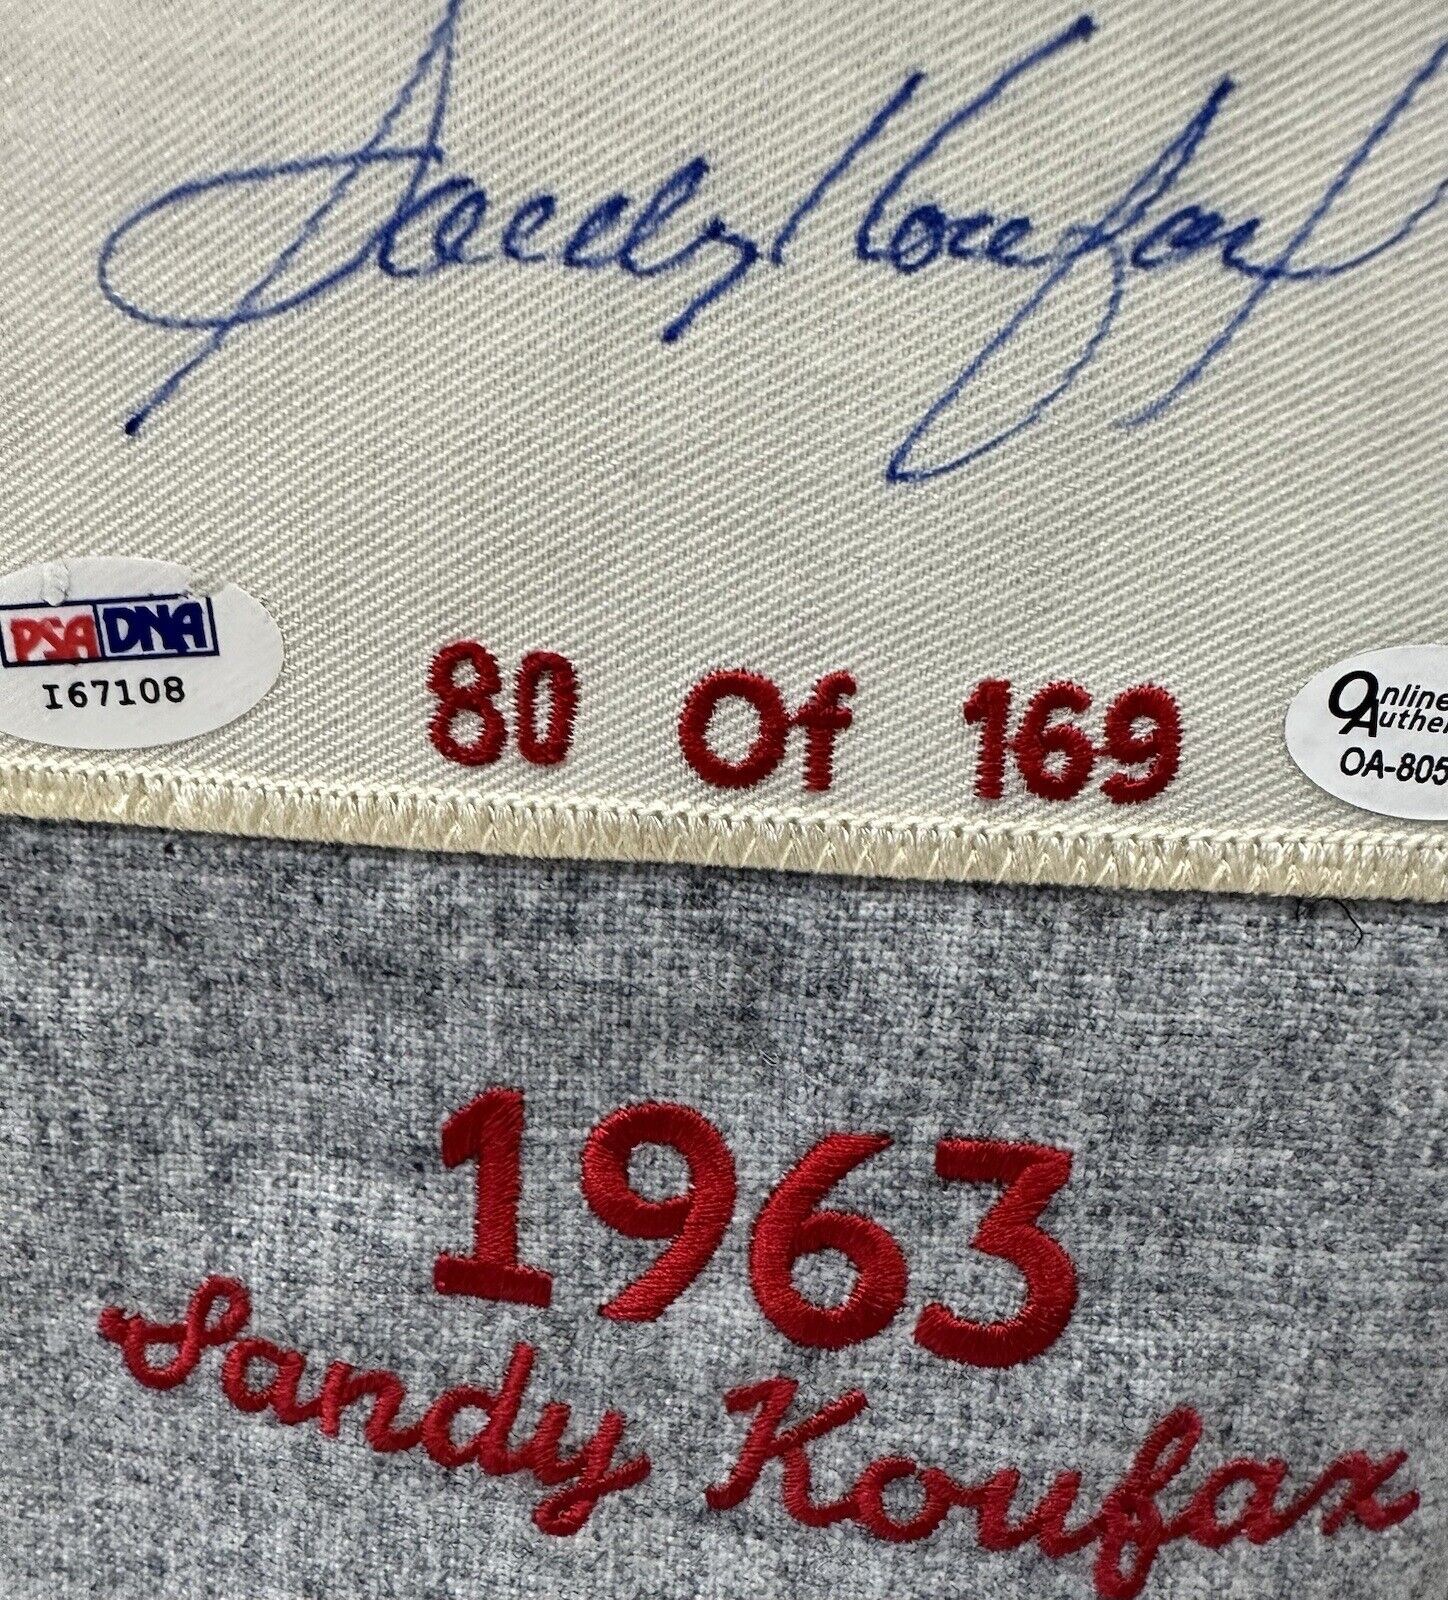 Sandy Koufax Brooklyn Dodgers Autographed Mitchell and Ness 1963